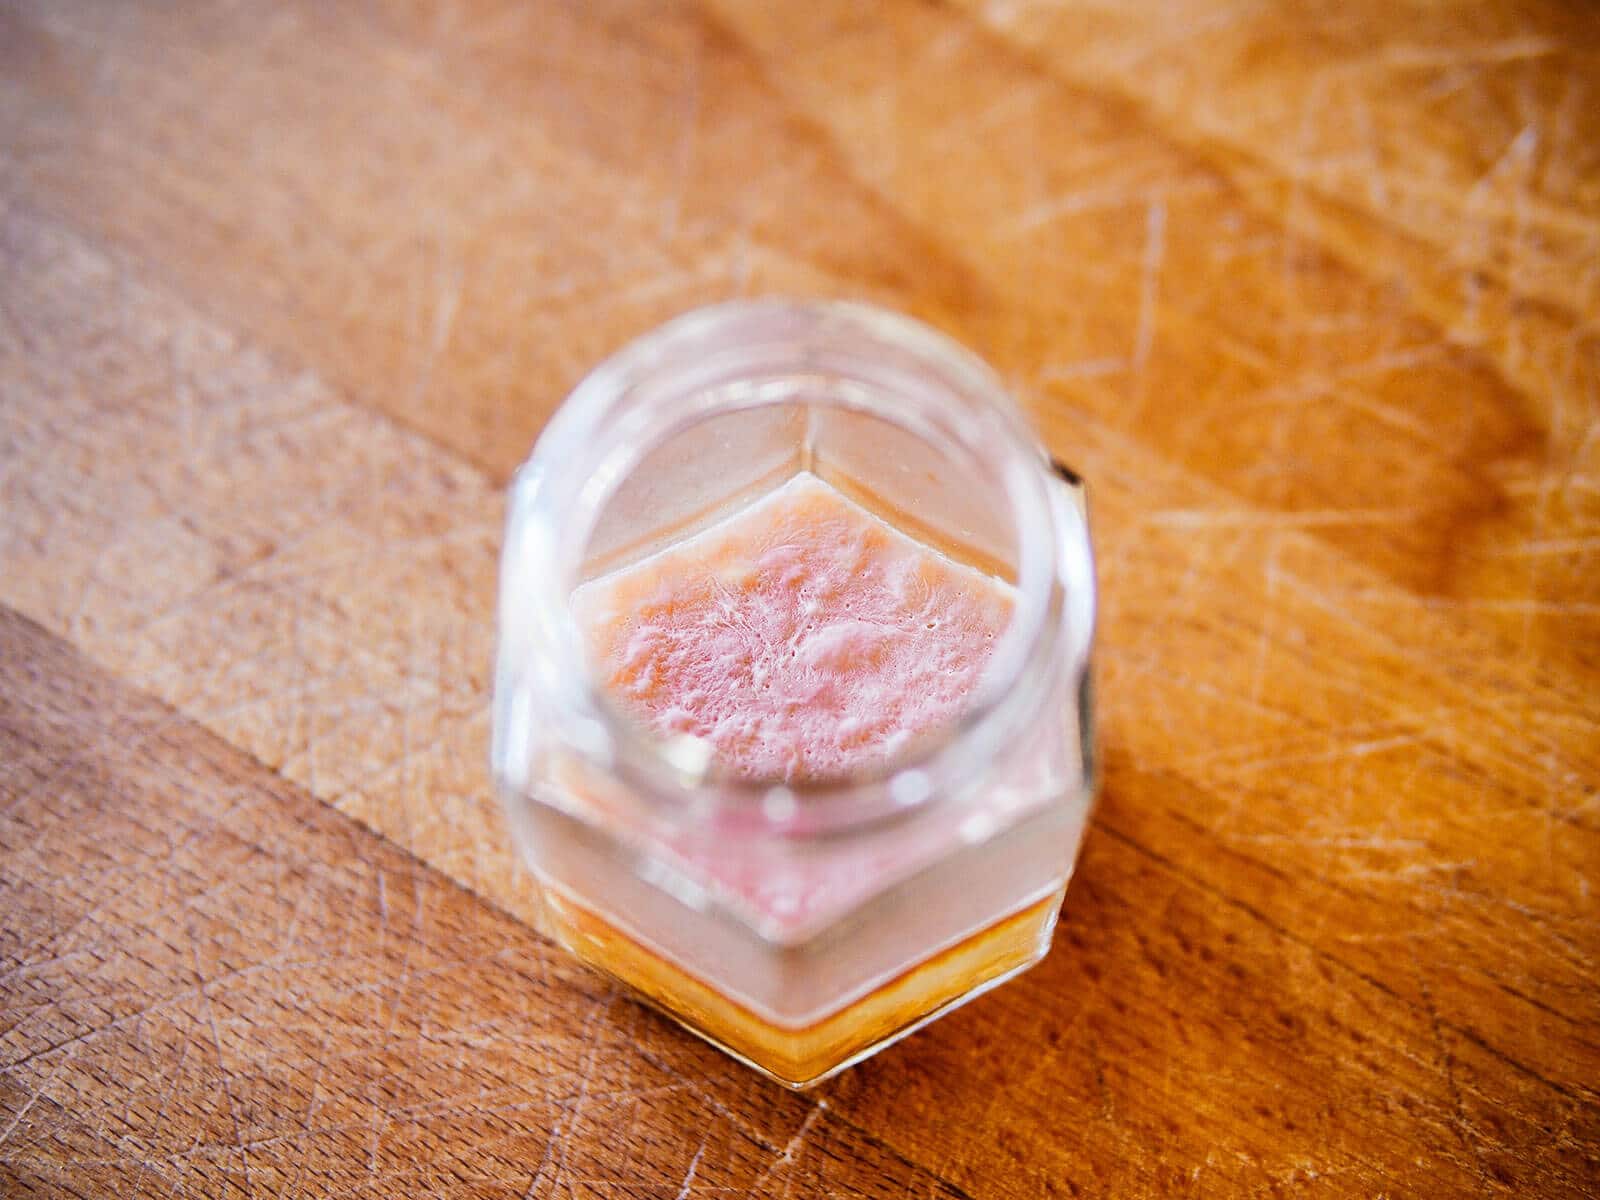 A layer of kahm yeast covering the surface of the water in a jar